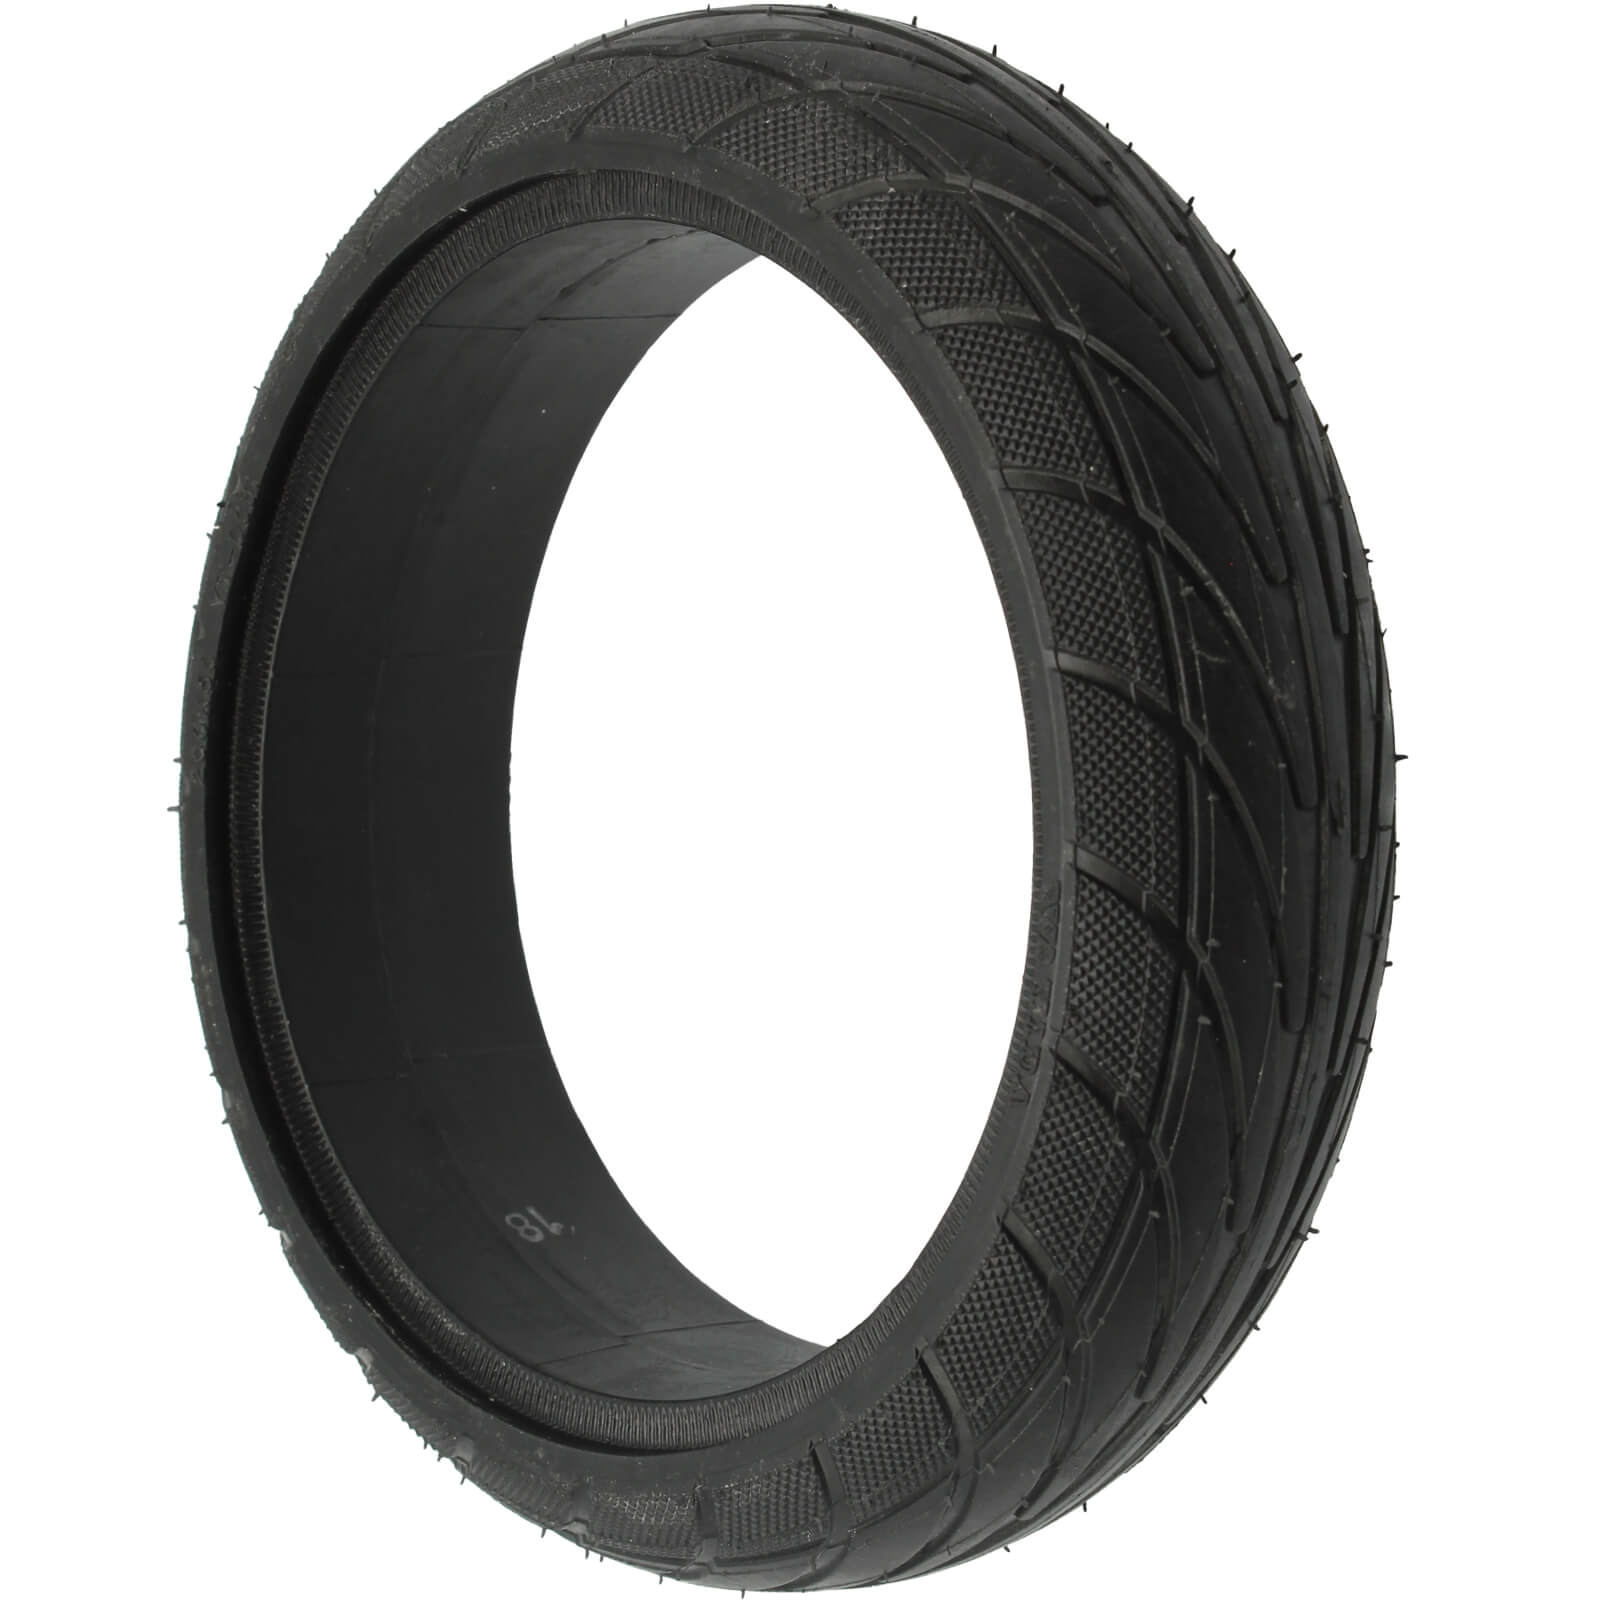 Solid tire 200x50